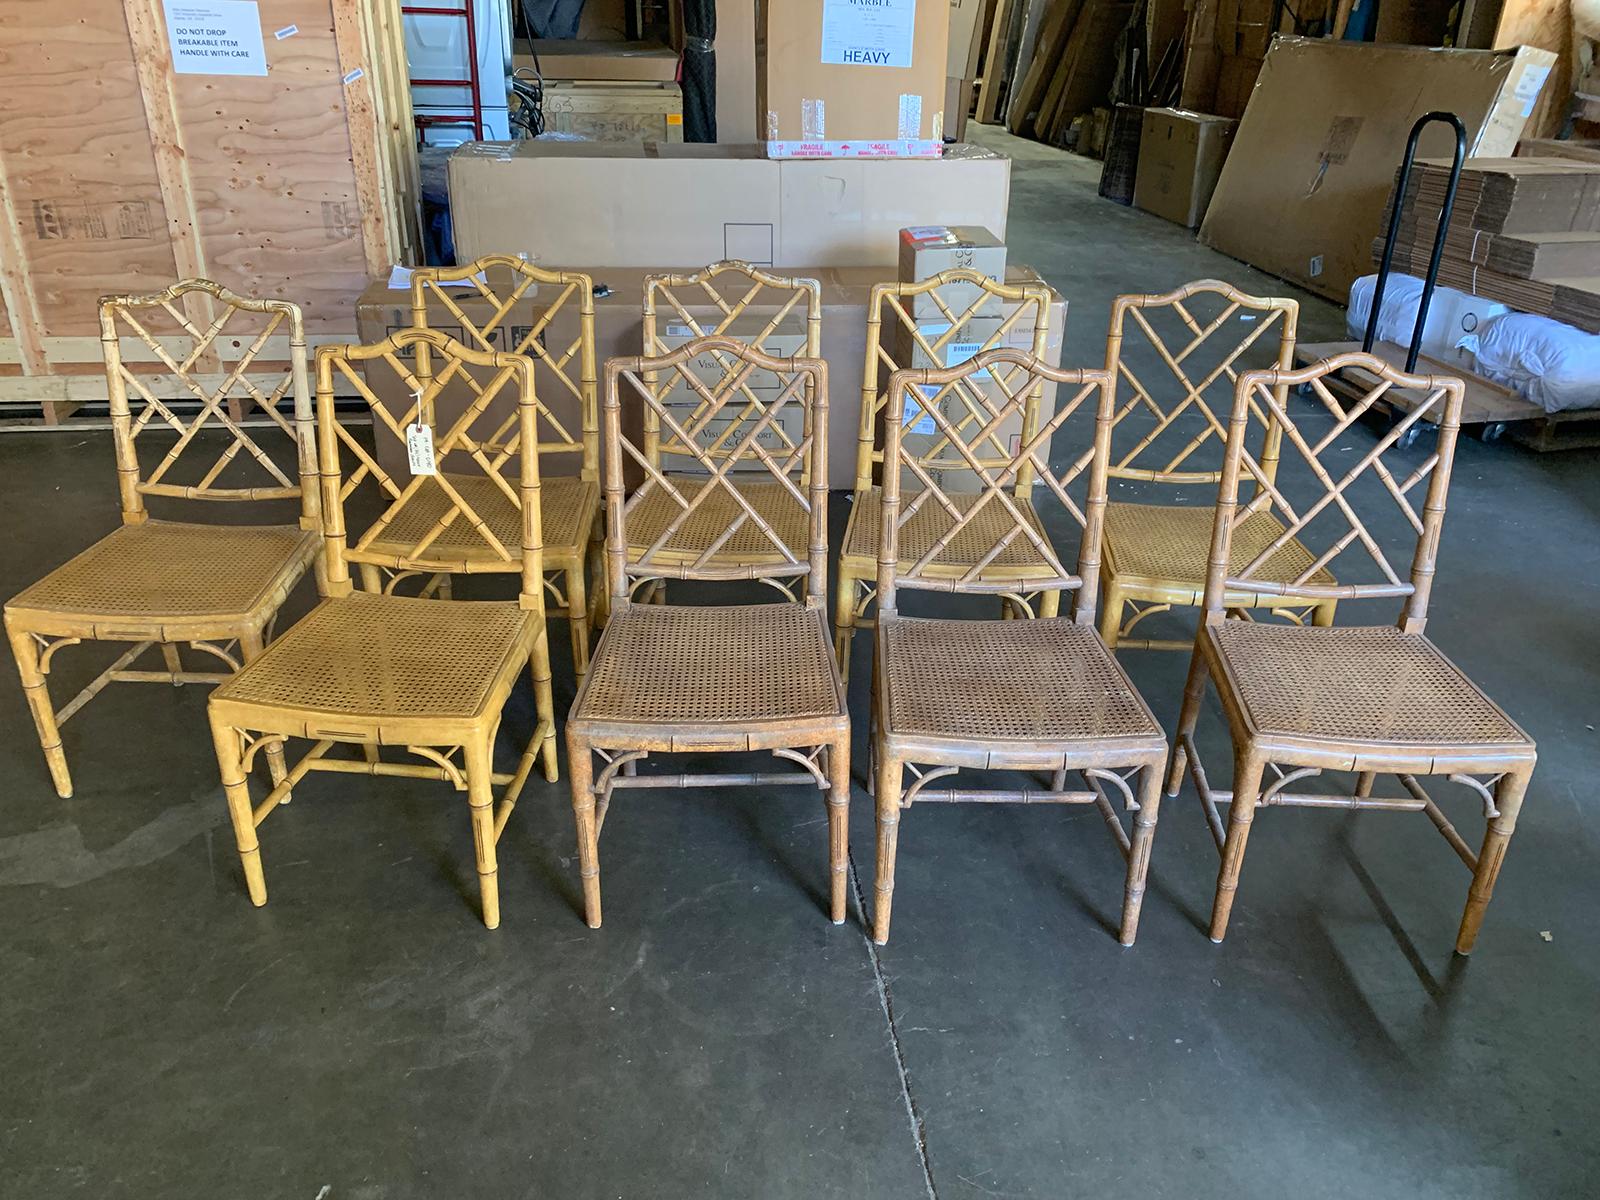 Set of (10) mid-20th century faux bamboo dining chairs with cane seats
8 side chairs and a pair of host and Hostess armchairs
Measures: Sides 18.5